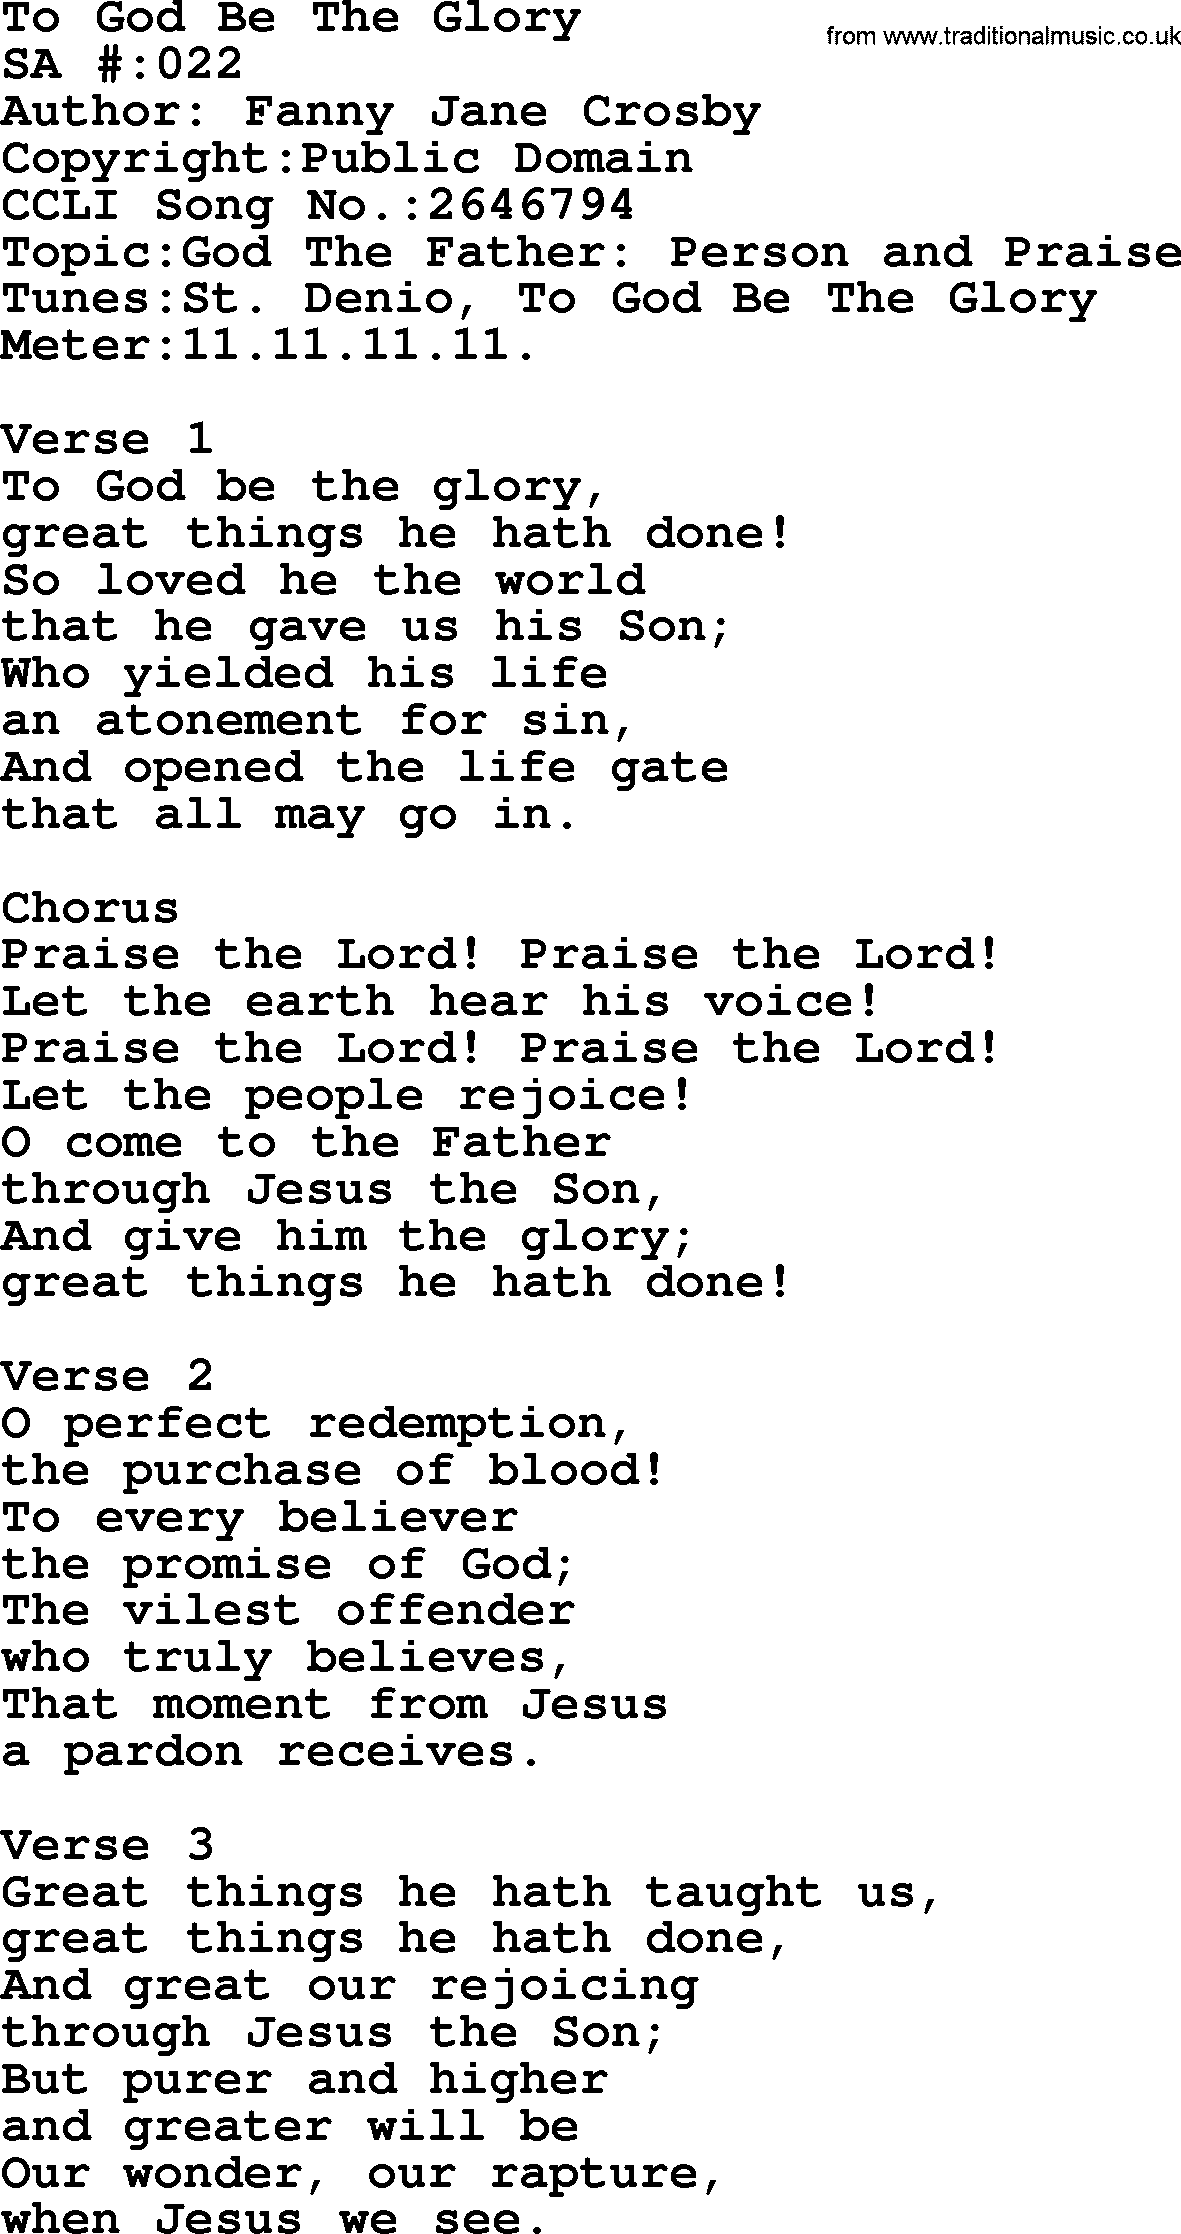 Salvation Army Hymnal, title: To God Be The Glory, with lyrics and PDF,